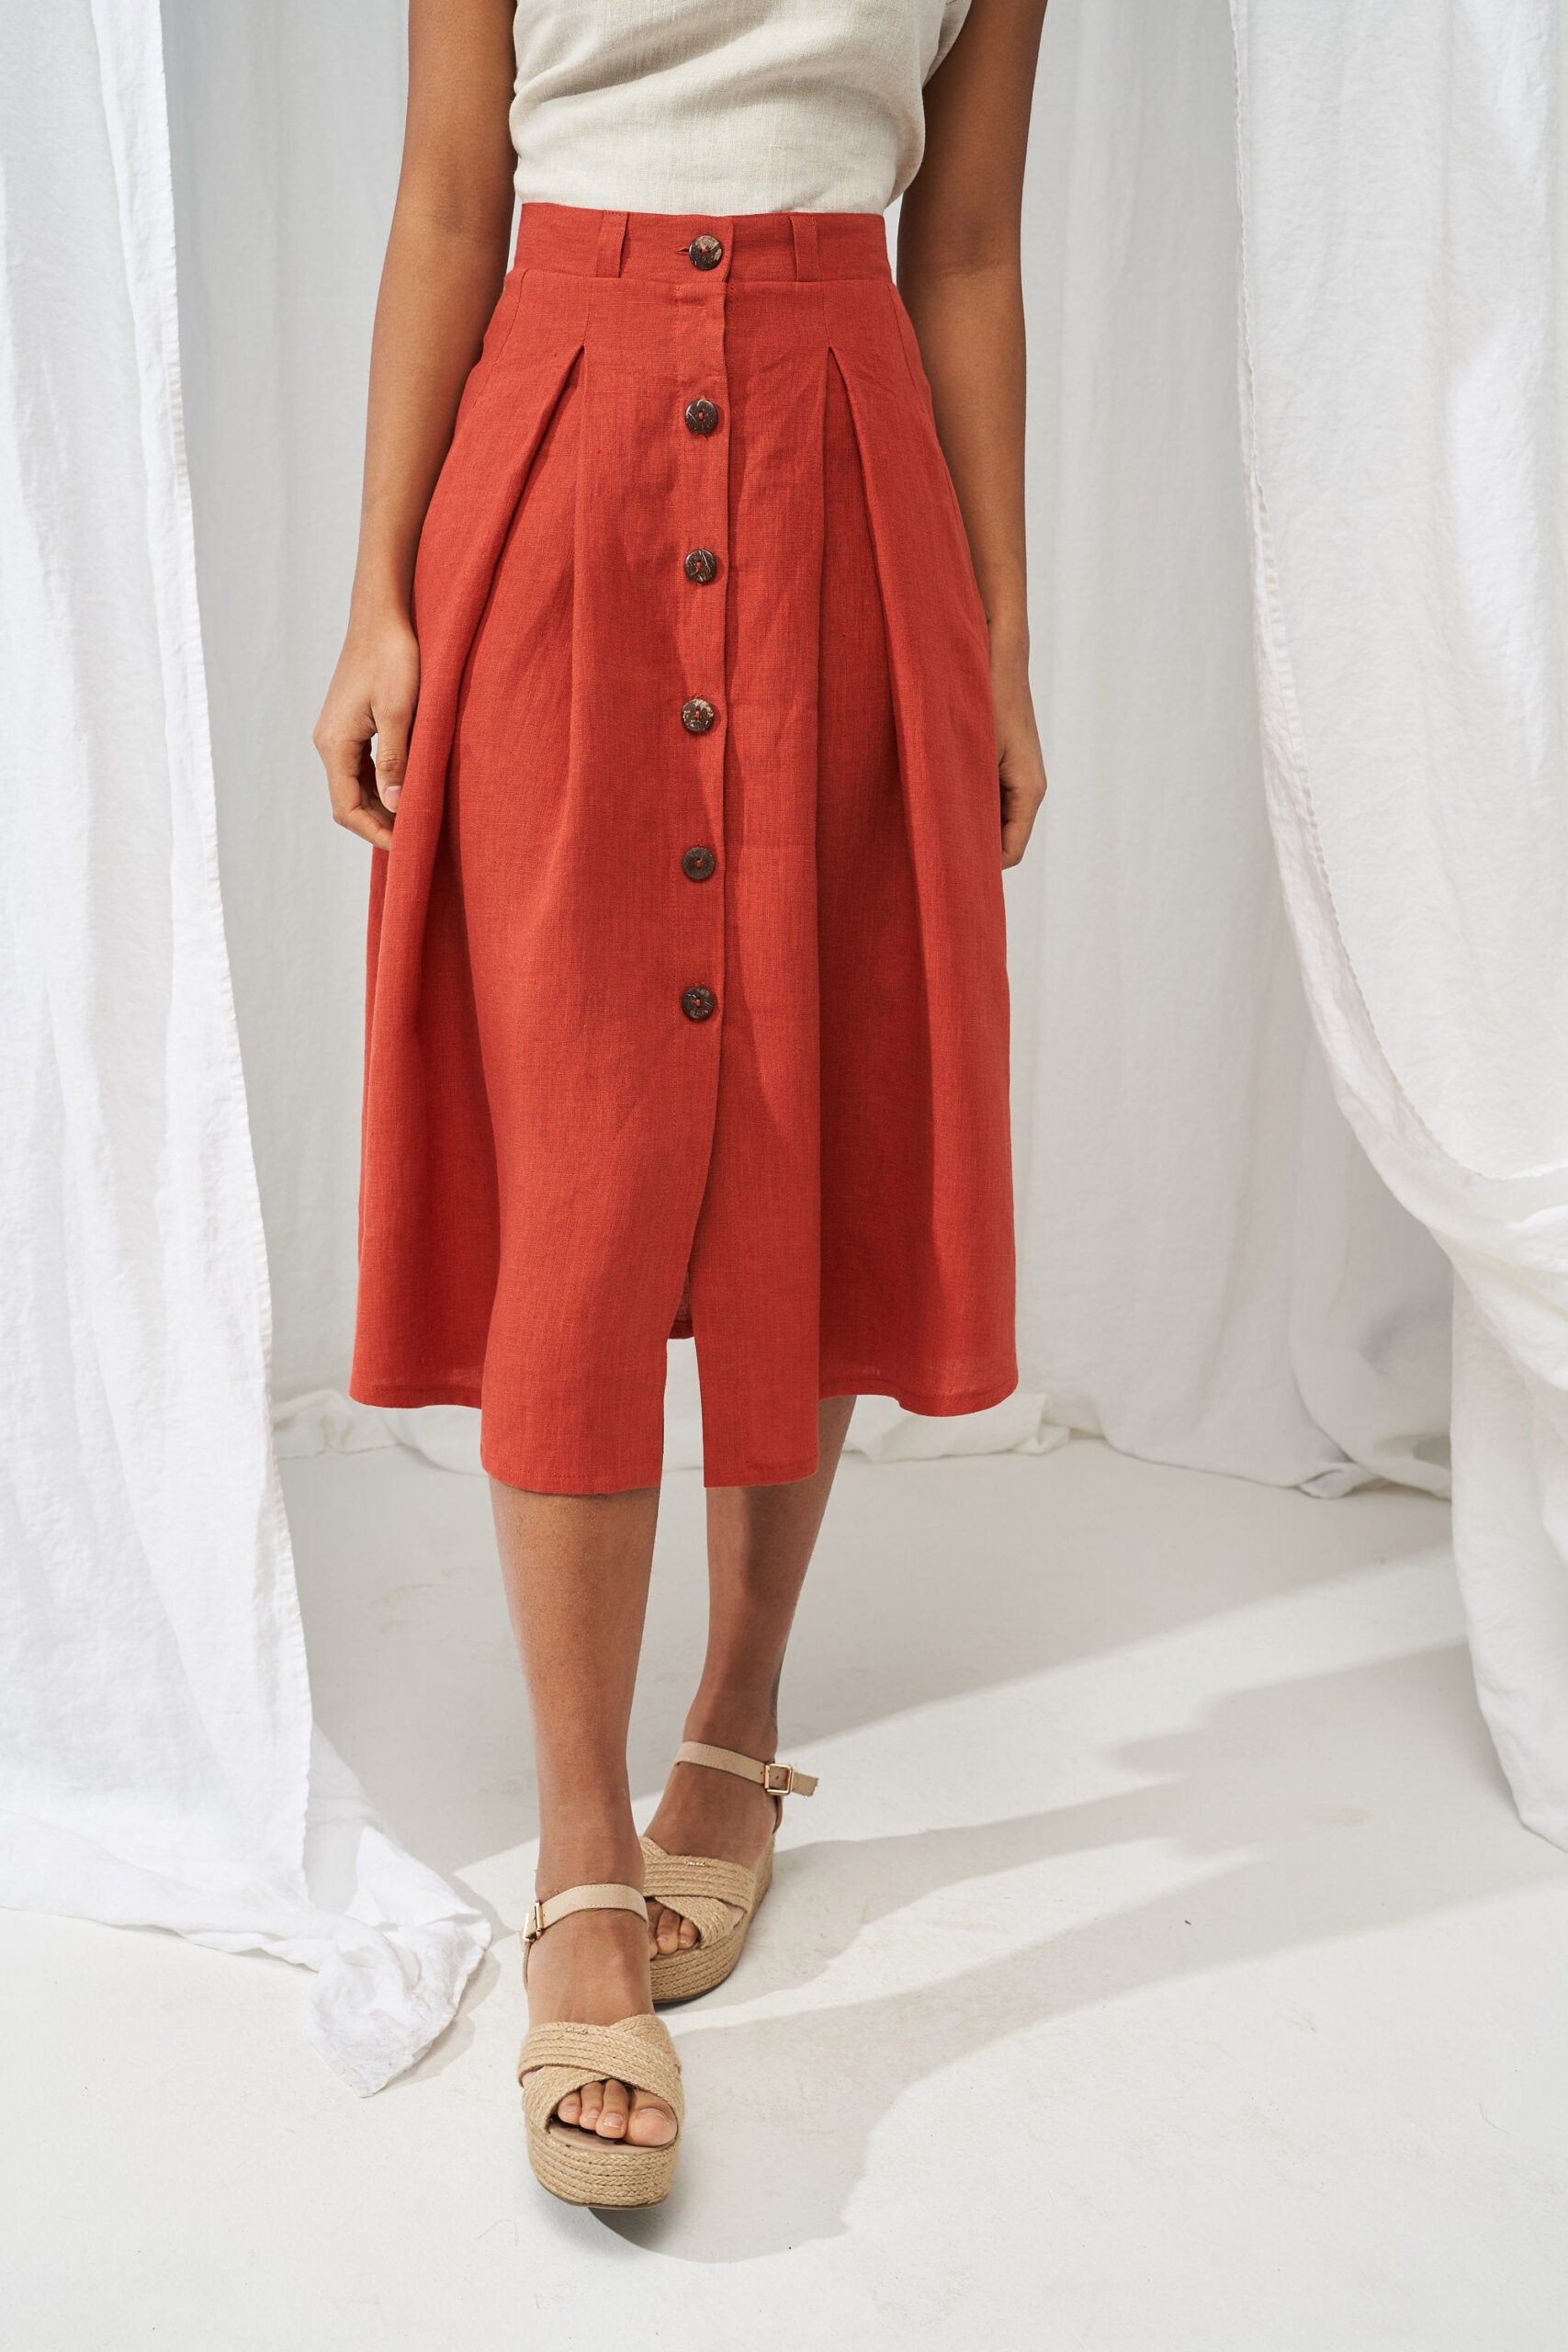 The Trendy Appeal of Button Front Skirts:
A Must-Have in Every Woman’s Wardrobe